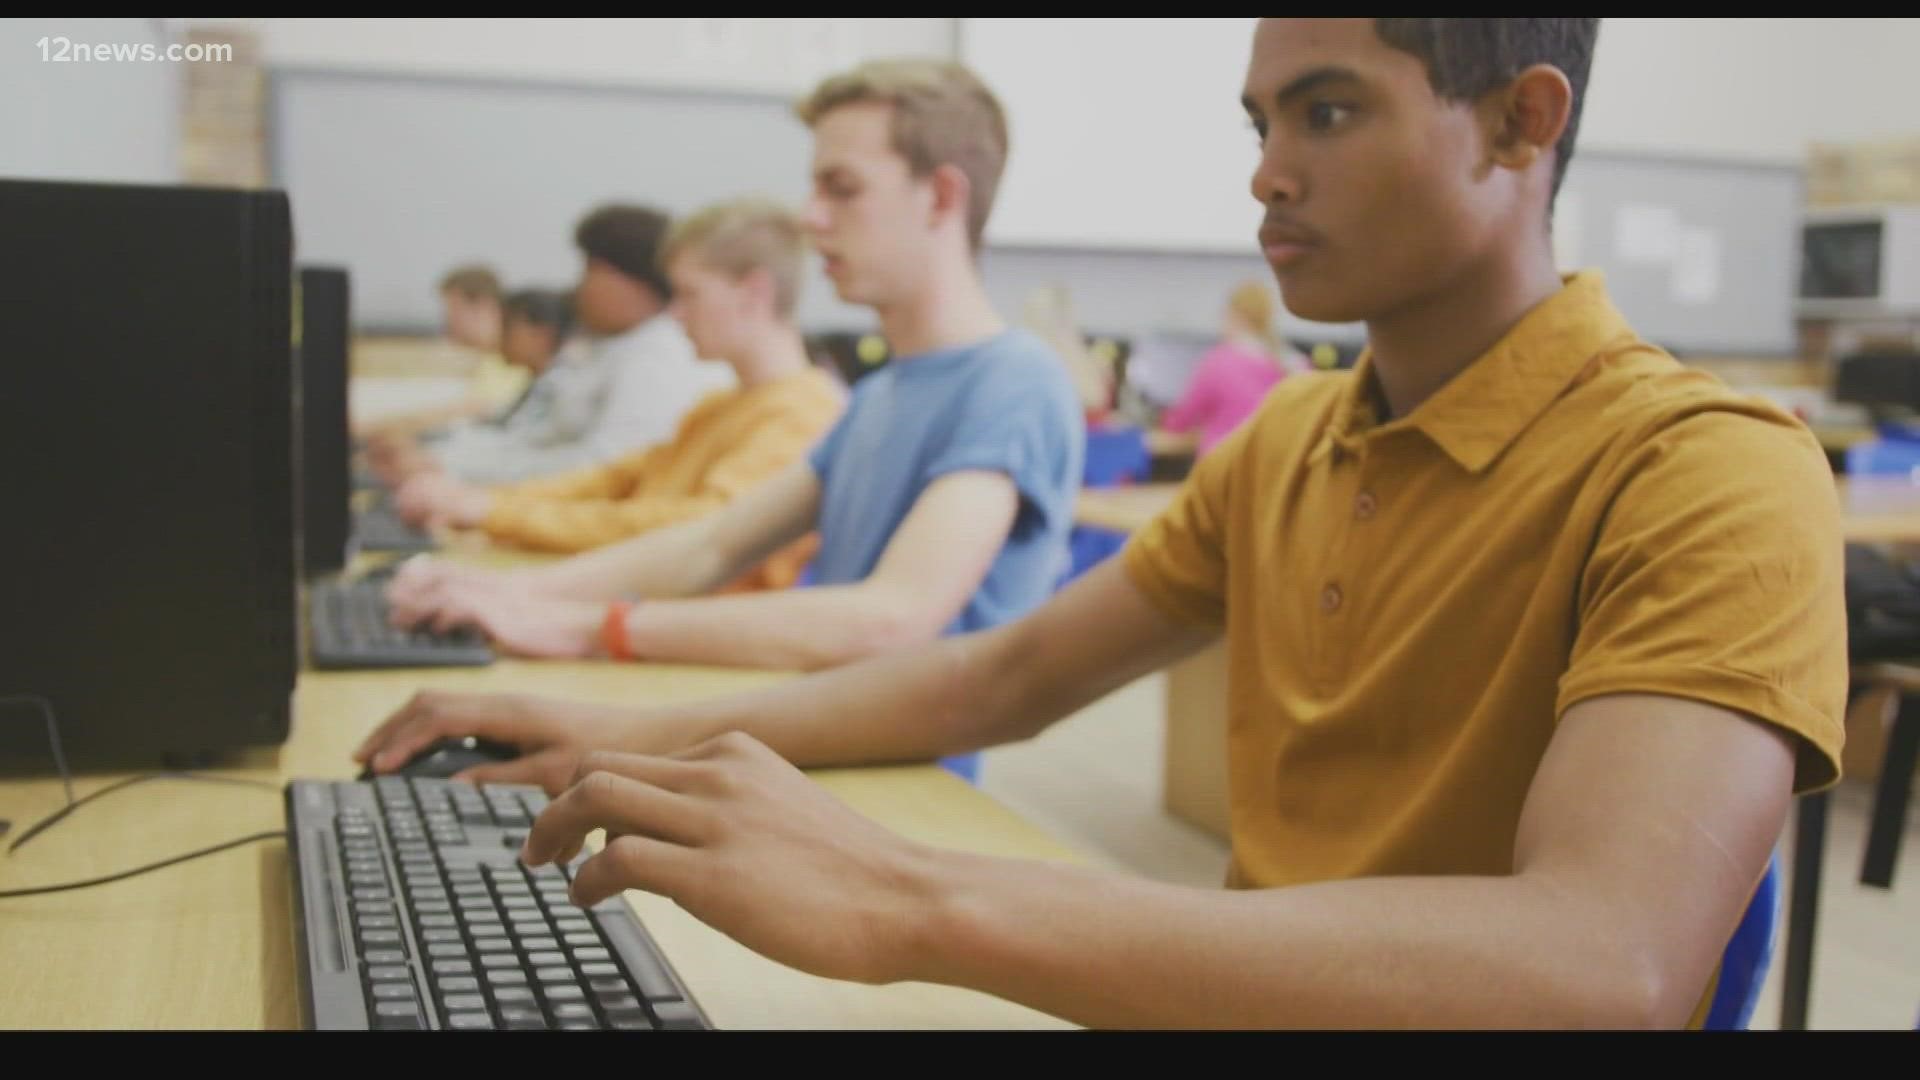 Big changes are on the way for Arizona high school students. The Scholastic Aptitude Test (SAT) is moving to an online format and that's not the only change coming.